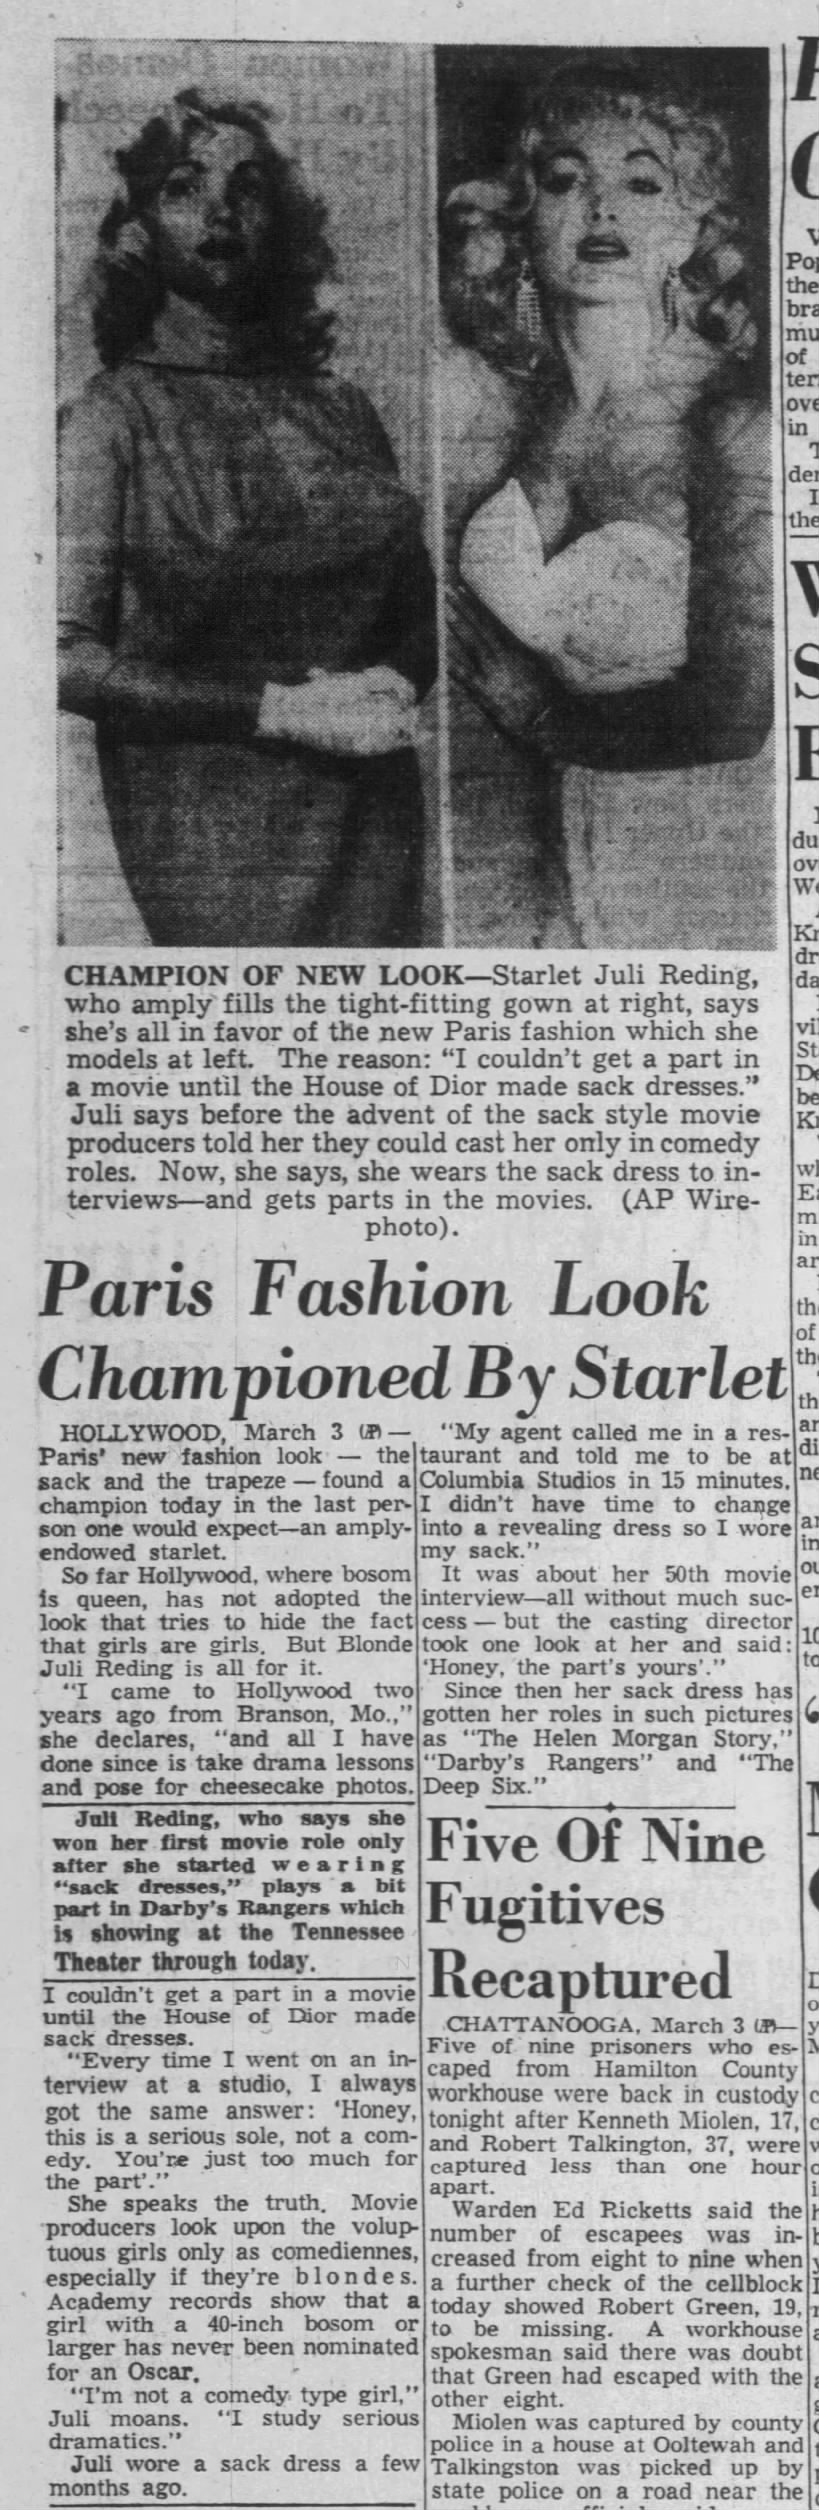 Paris Fashion Look Championed by Starlet